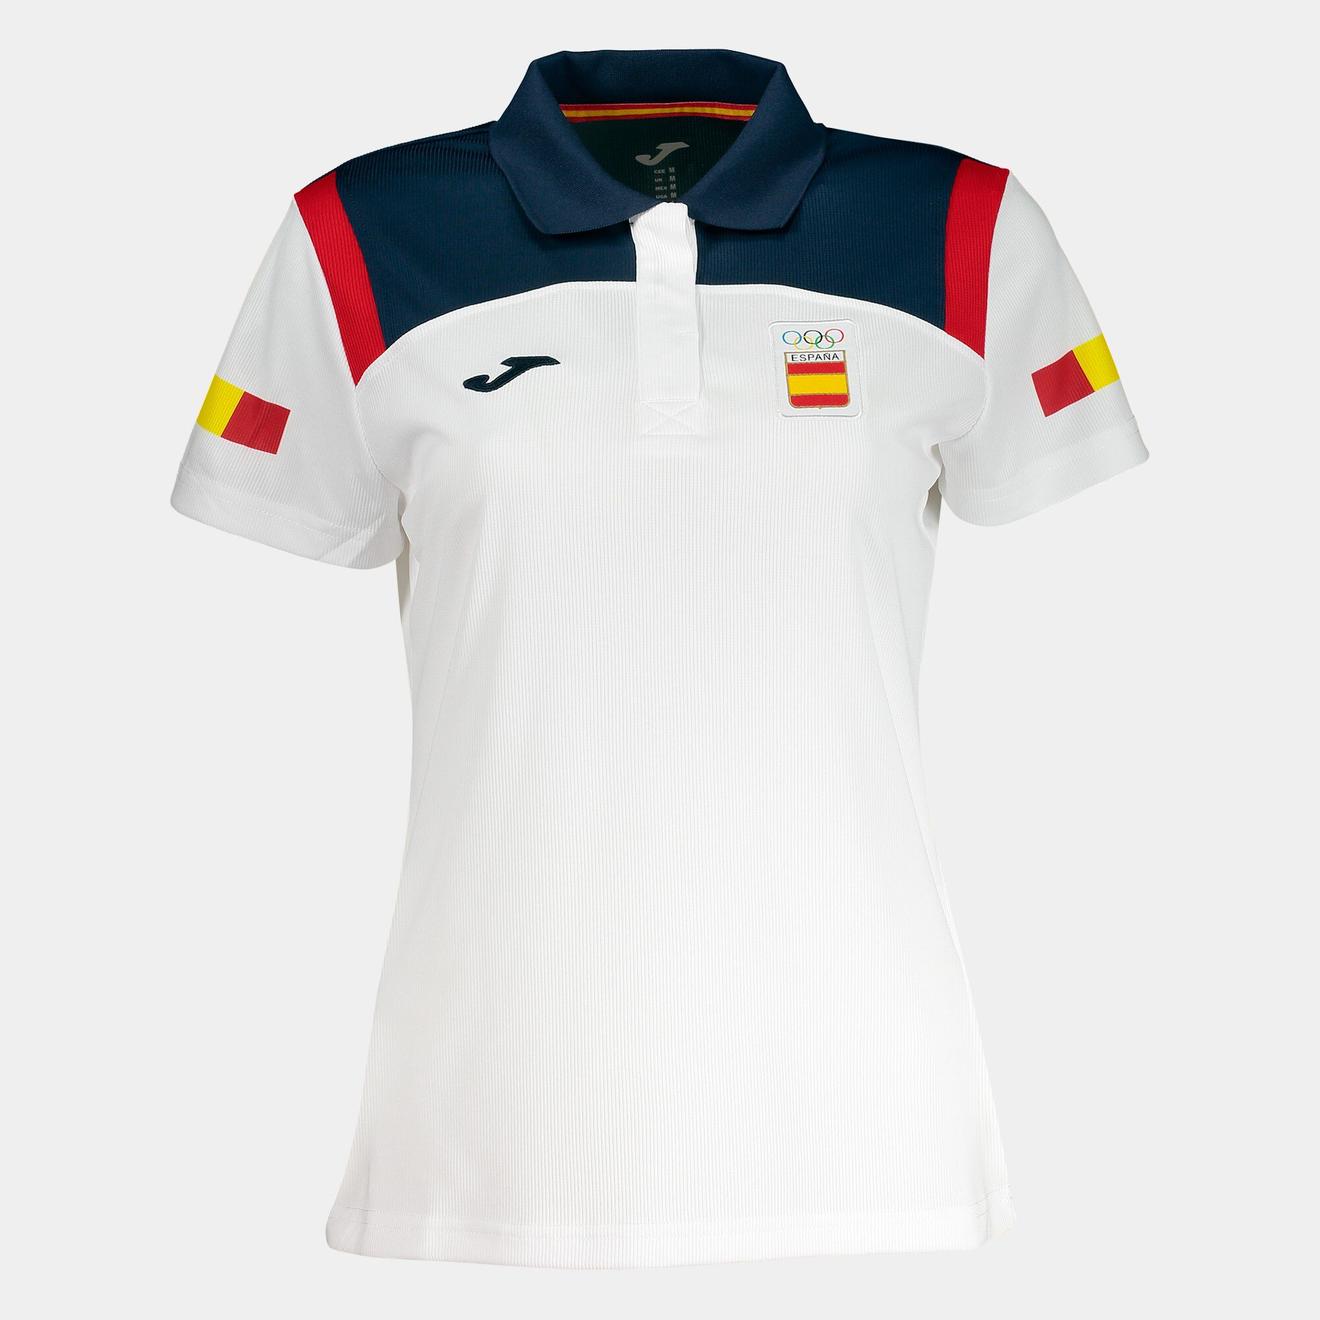 Polo shirt short-sleeve podium Spanish Olympic Committee offers at £23.05 in Joma